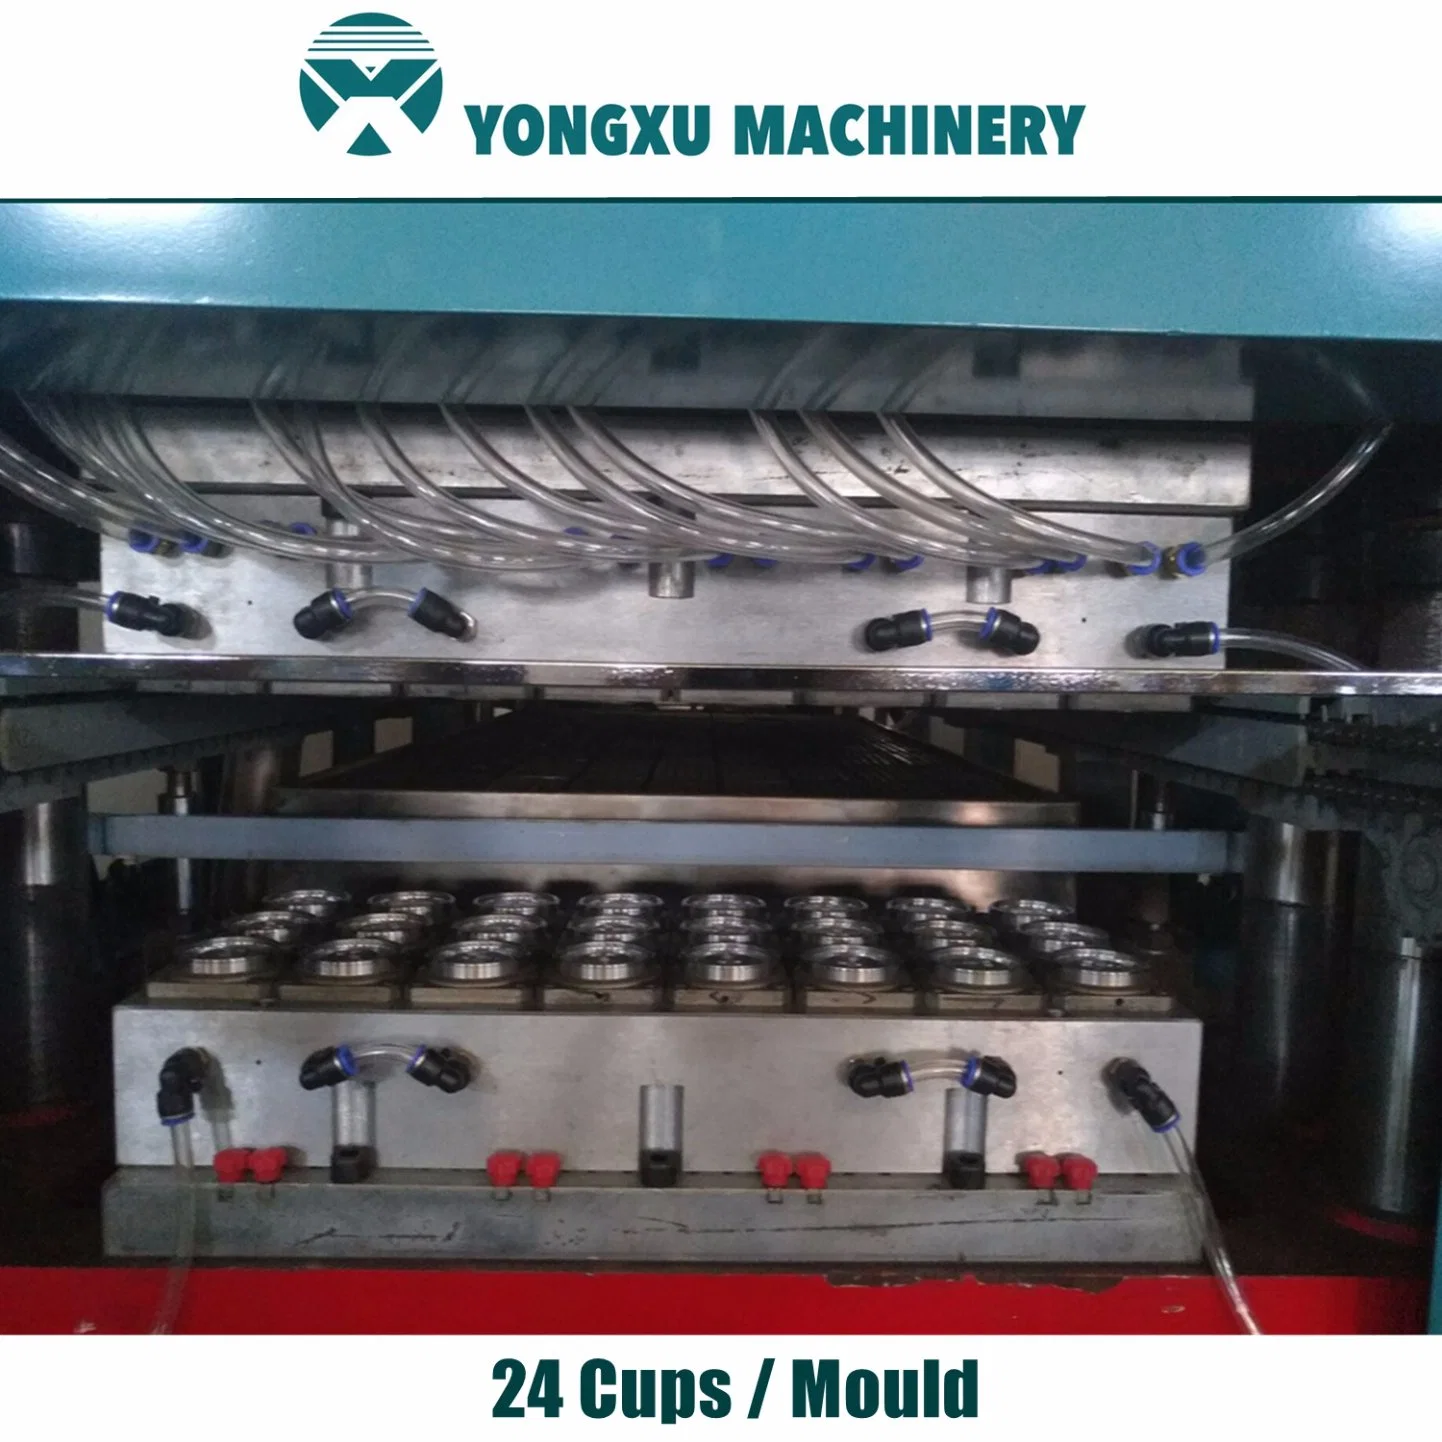 Molds for Making Plastic Cups/Water Cups/Flower Pots/Coffee Cups/Trays/Lunch Box Thermoforming Machines (3 LINES)